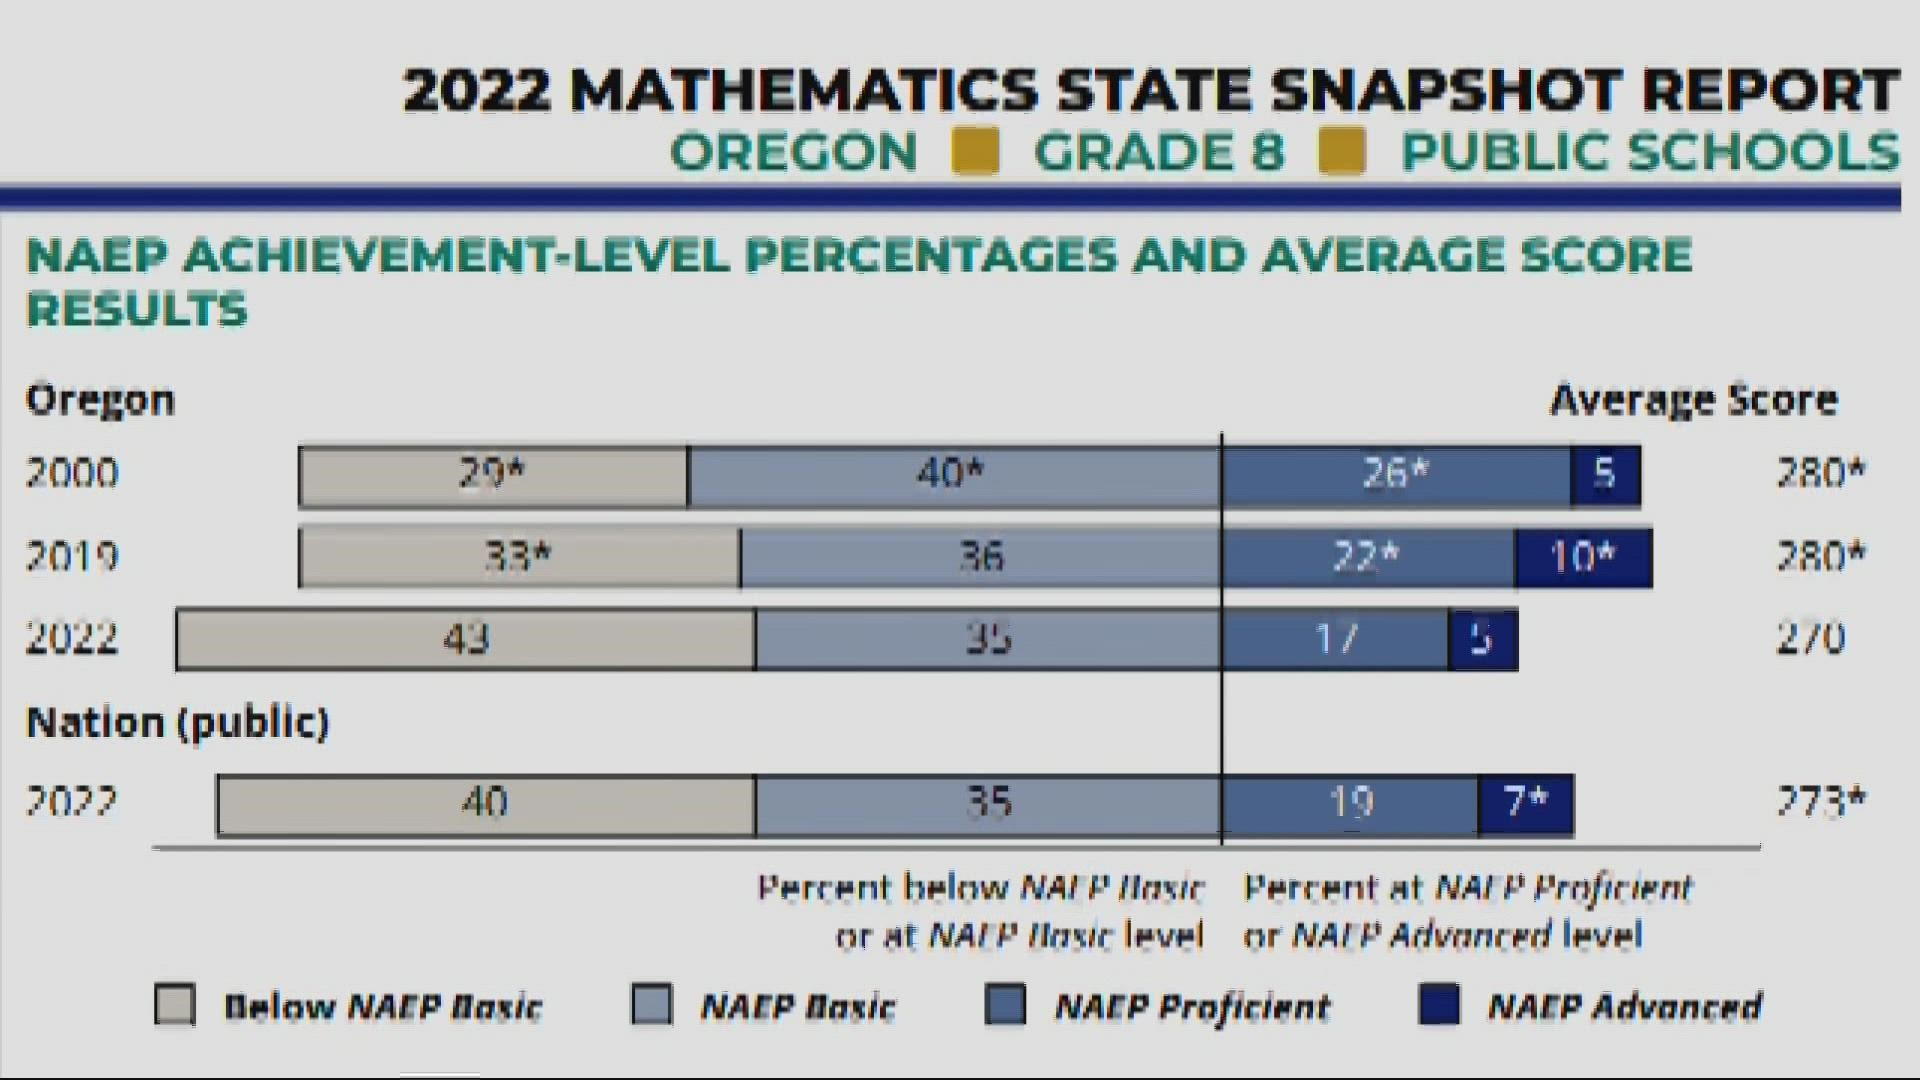 The NAEP is the standardized tests given to students. Test scores show that students in Oregon are falling below average in both math and reading.